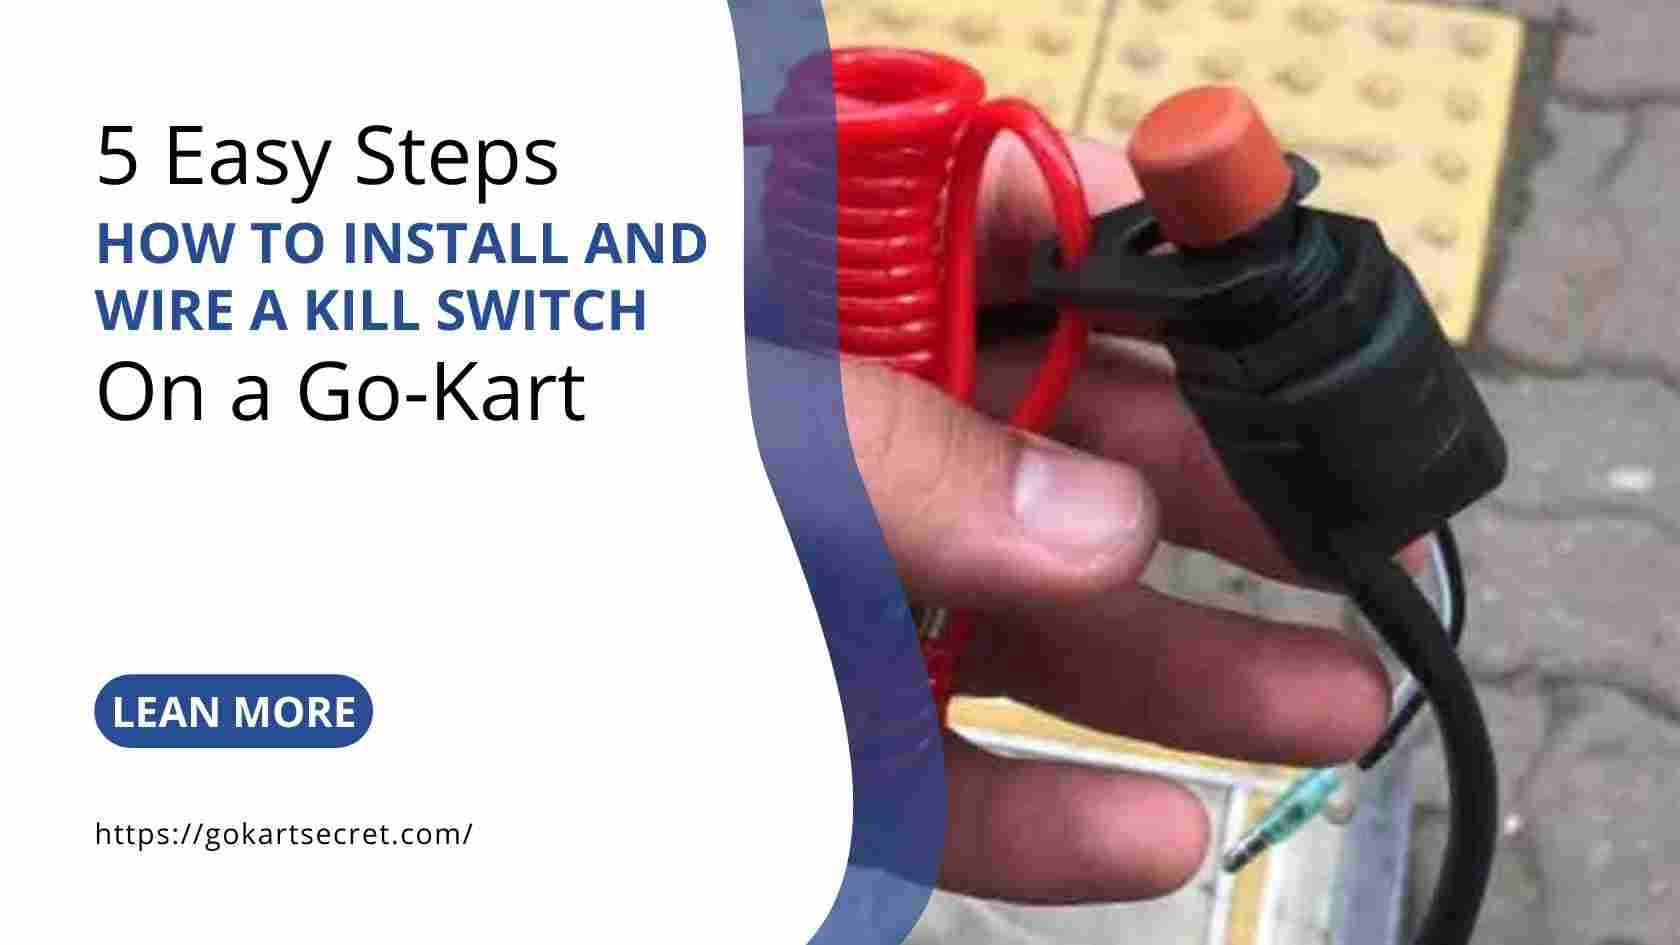 How to Install and Wire a Kill Switch on a Go-Kart in 5 Easy Steps